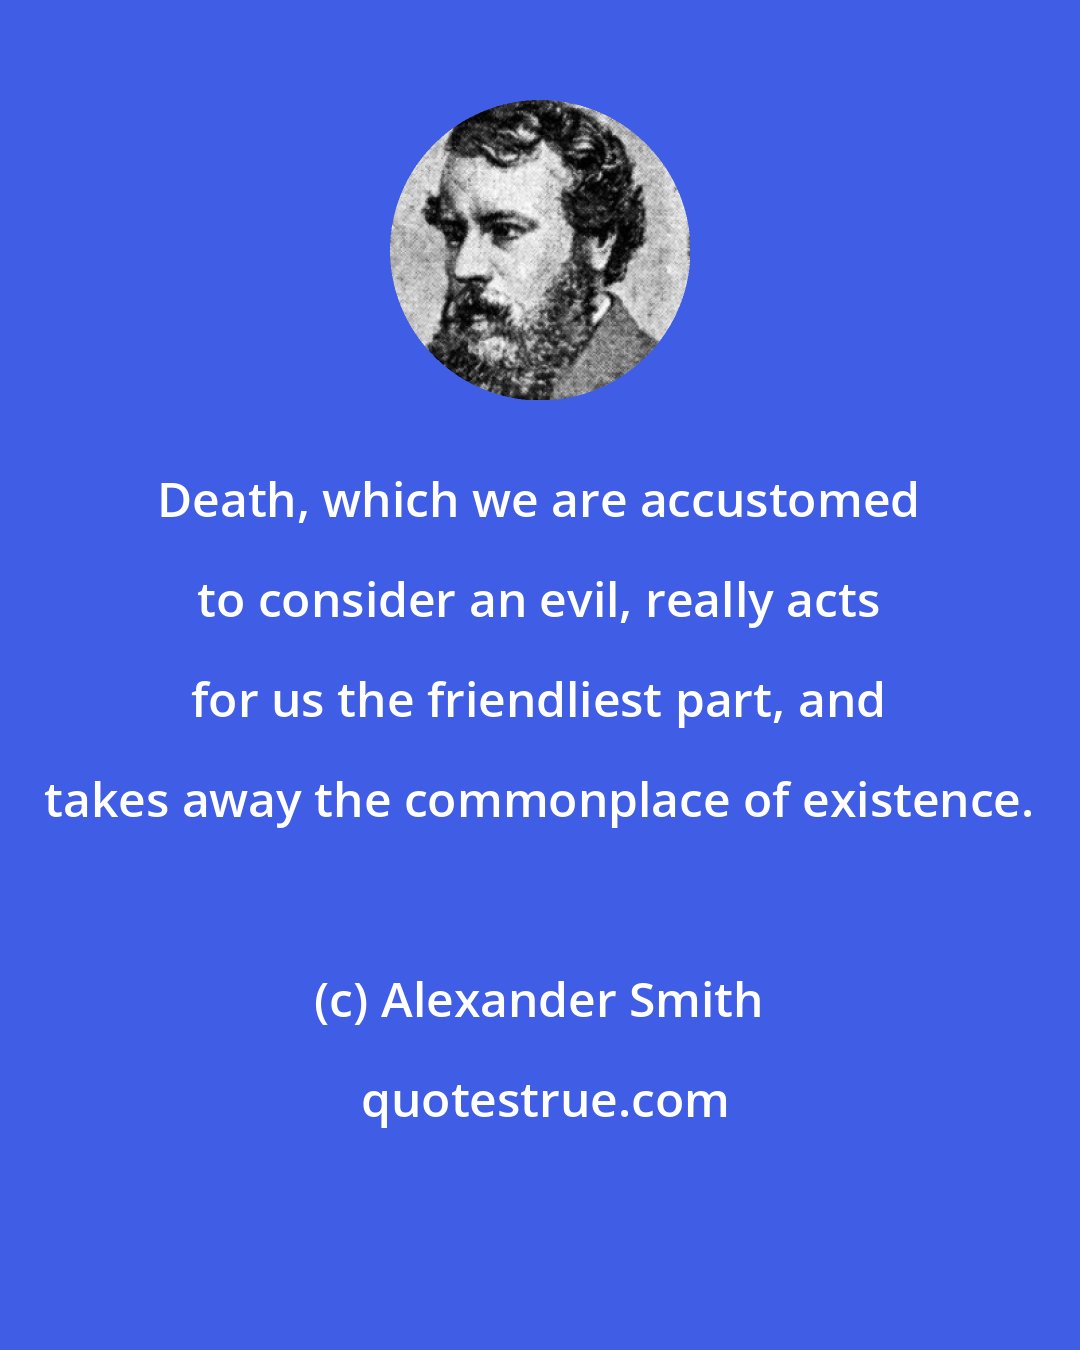 Alexander Smith: Death, which we are accustomed to consider an evil, really acts for us the friendliest part, and takes away the commonplace of existence.